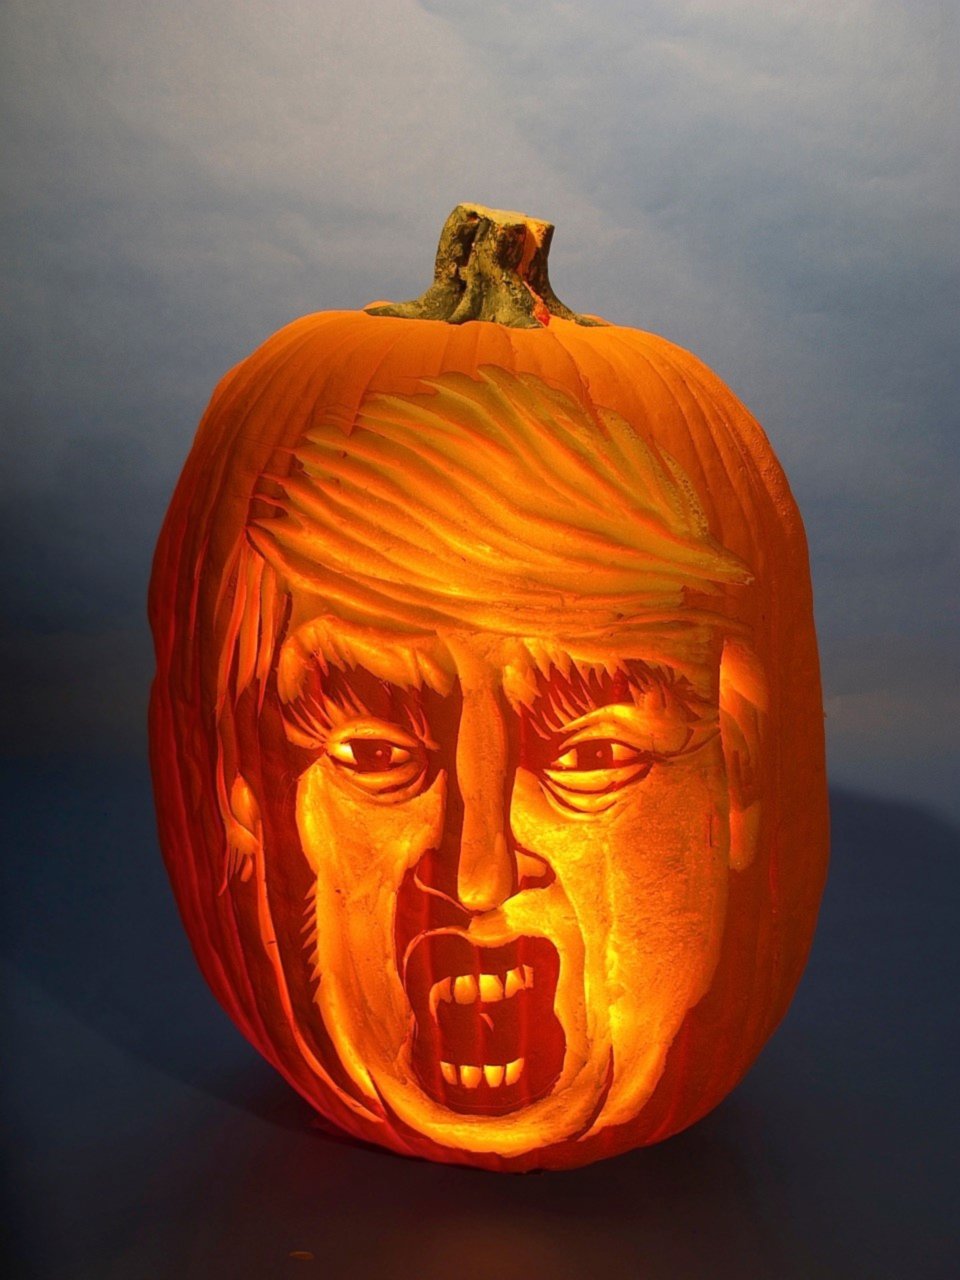 PHOTO: New York-based artist Hugh McMahon is known for his elaborate pumpkin carvings, particularly of political candidates.